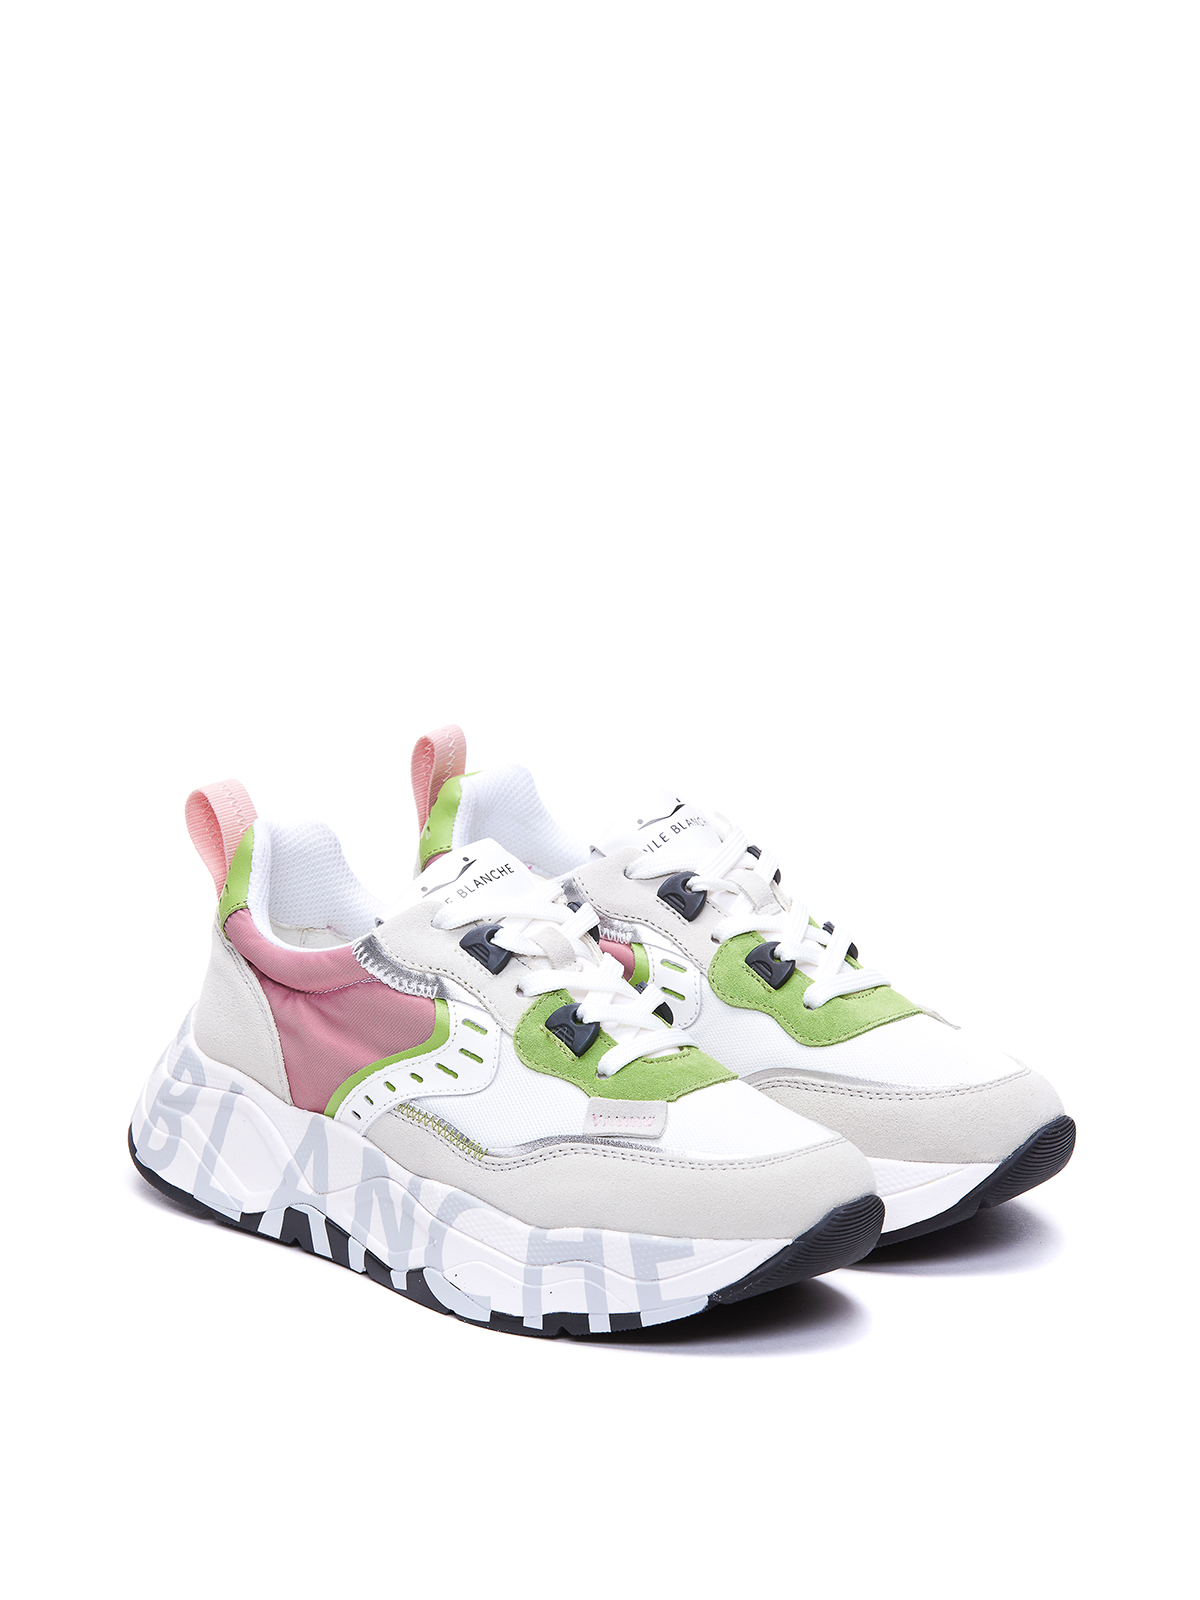 Trainers Voile Blanche - Club 105 sneakers - 2017475011N04